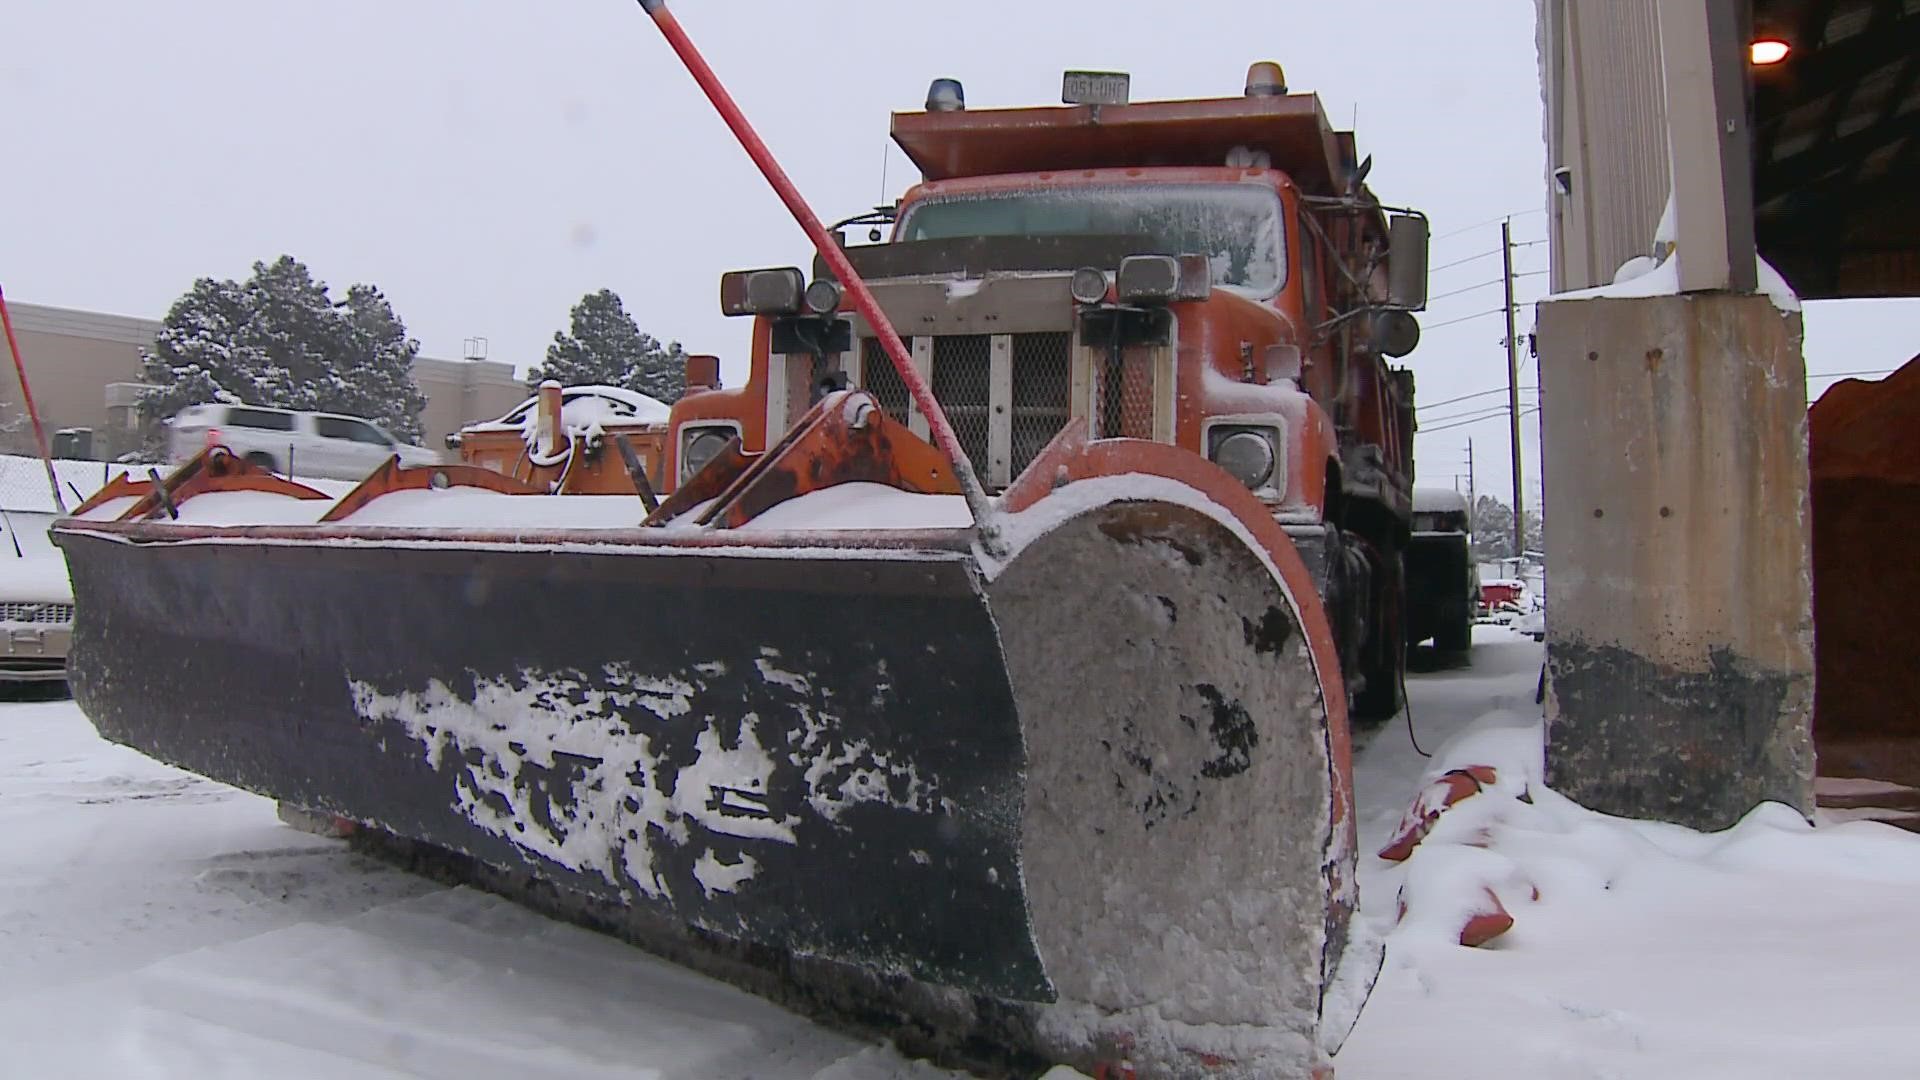 Like many employers, the state has faced recent staffing challenges – including hiring enough staff to drive snowplows.